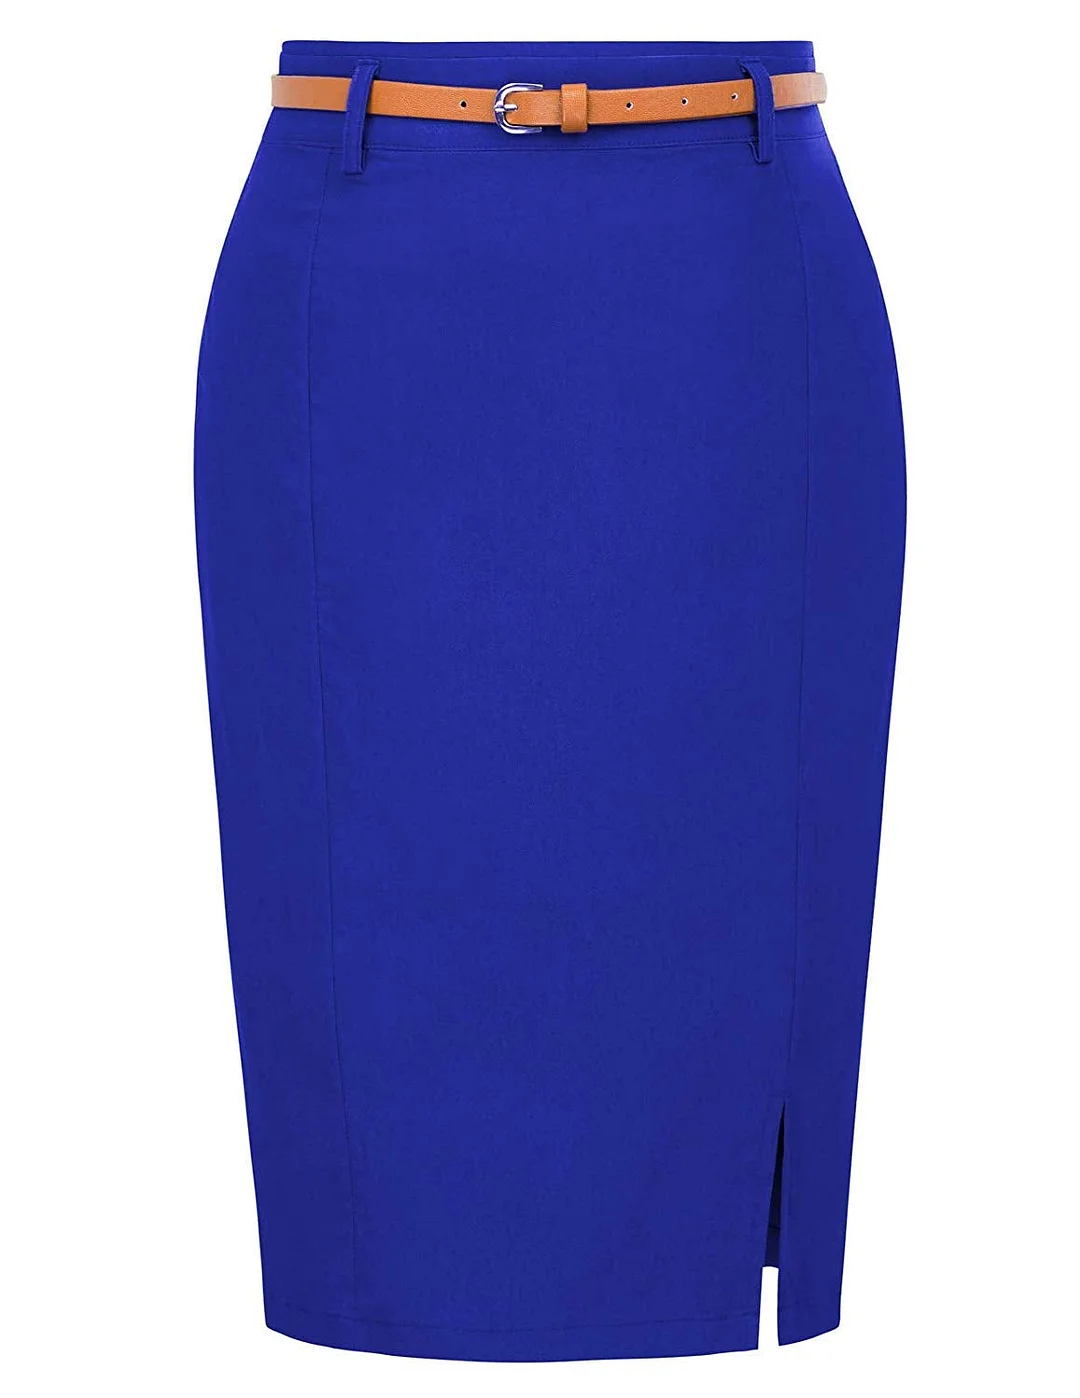 Pencil Skirt Women's Bodycon Pencil Skirt with Blet Solid Color Hip-Wrapped